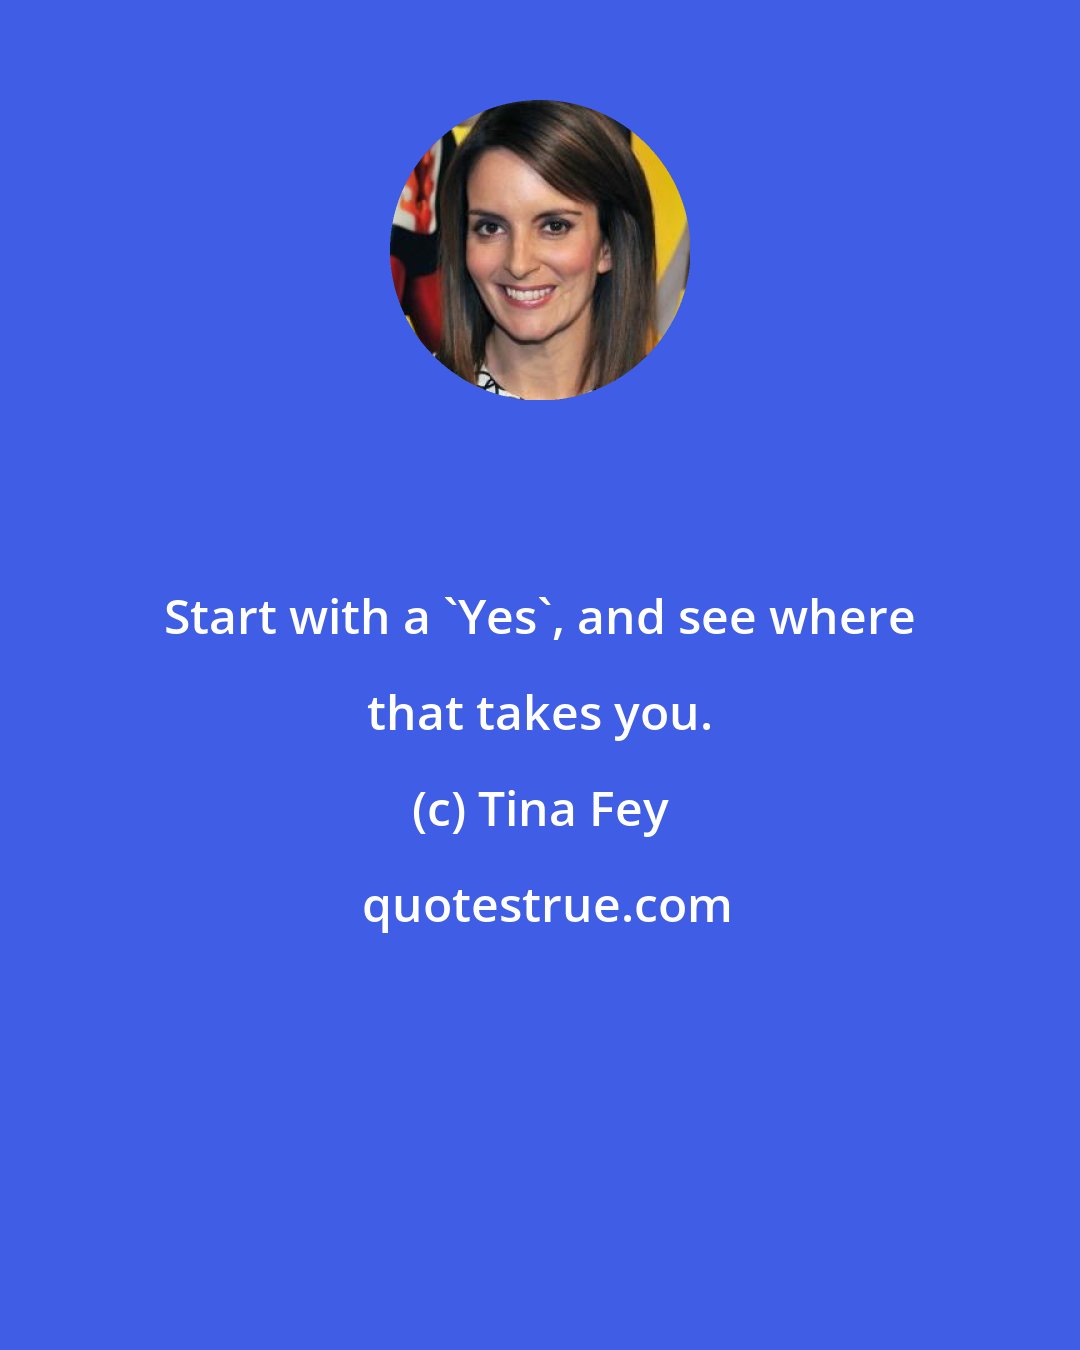 Tina Fey: Start with a 'Yes', and see where that takes you.